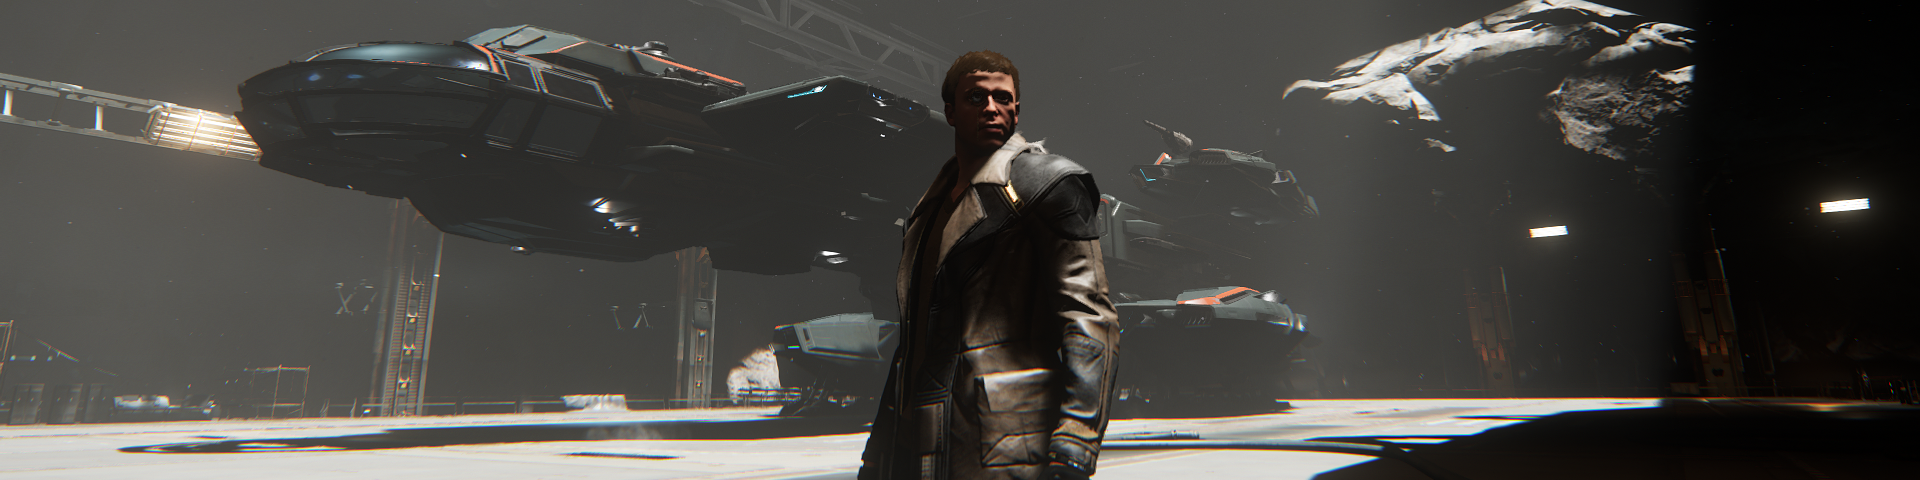 A man standing in front of a landed space cutter.